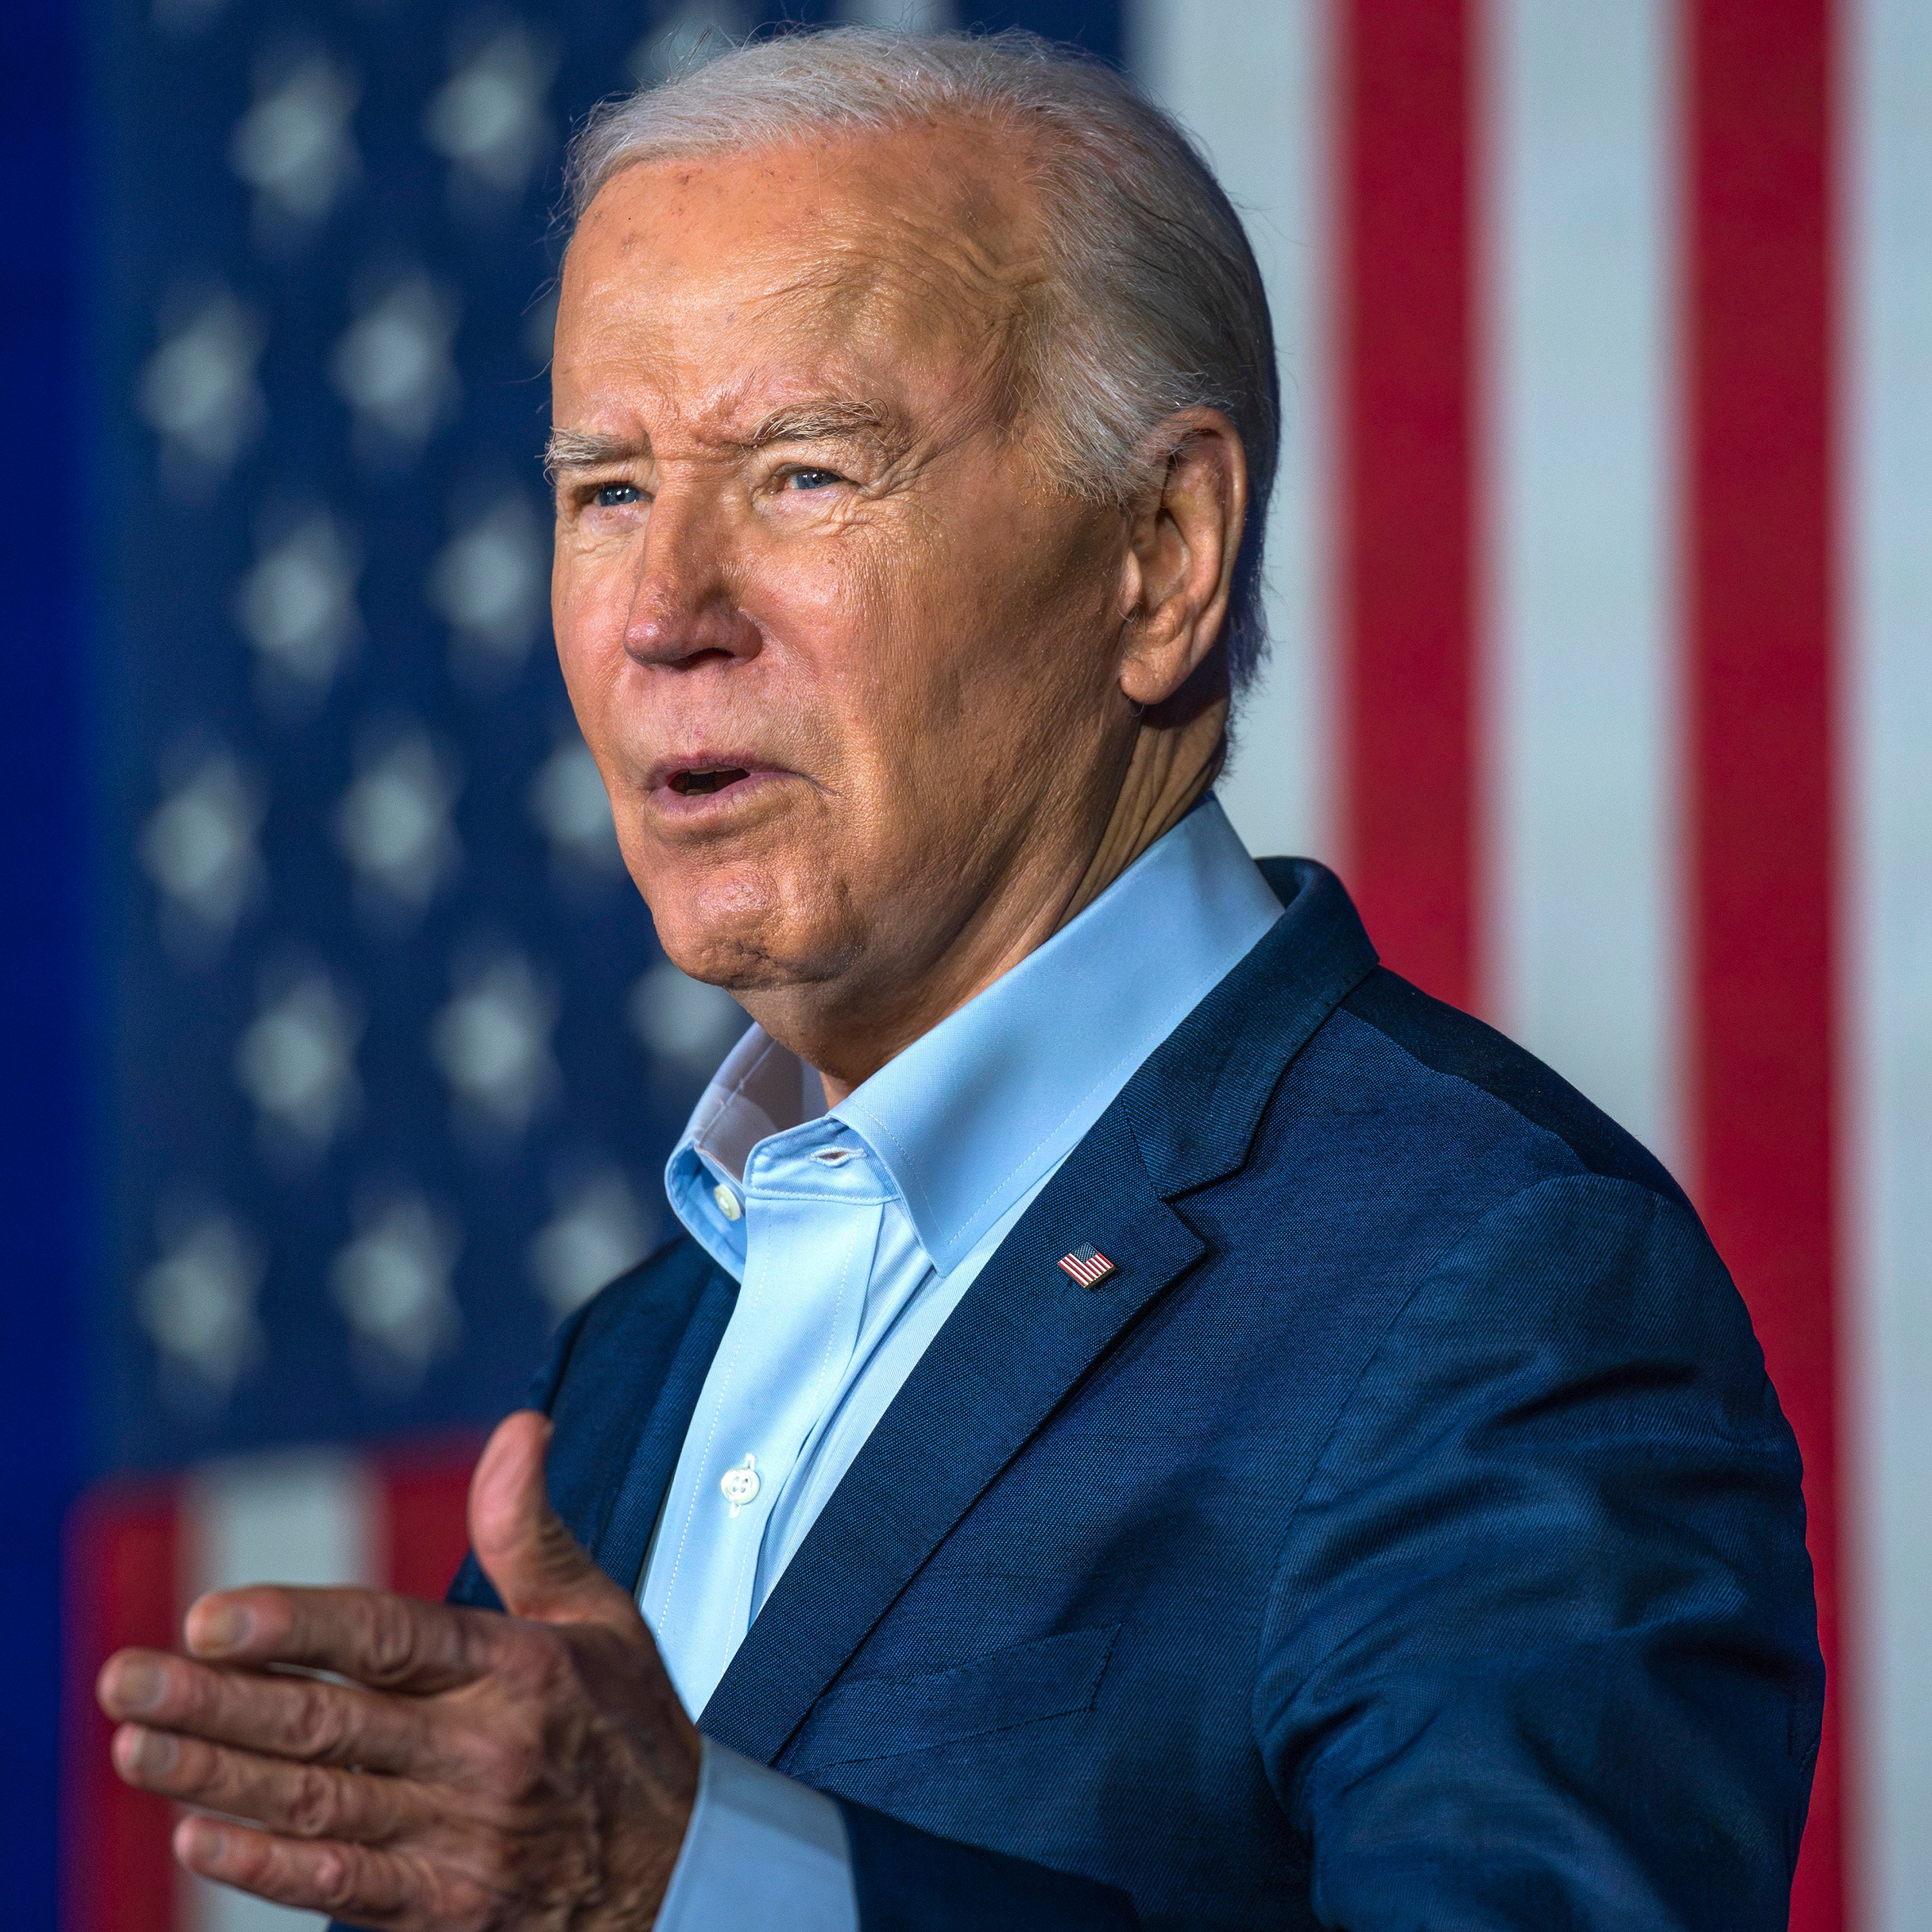 US President Joe Biden campaigns last week in Pennsylvania, where he implied at a missing-in-action war memorial that his uncle might have been eaten by cannibals. Photo: Getty Images/TNS